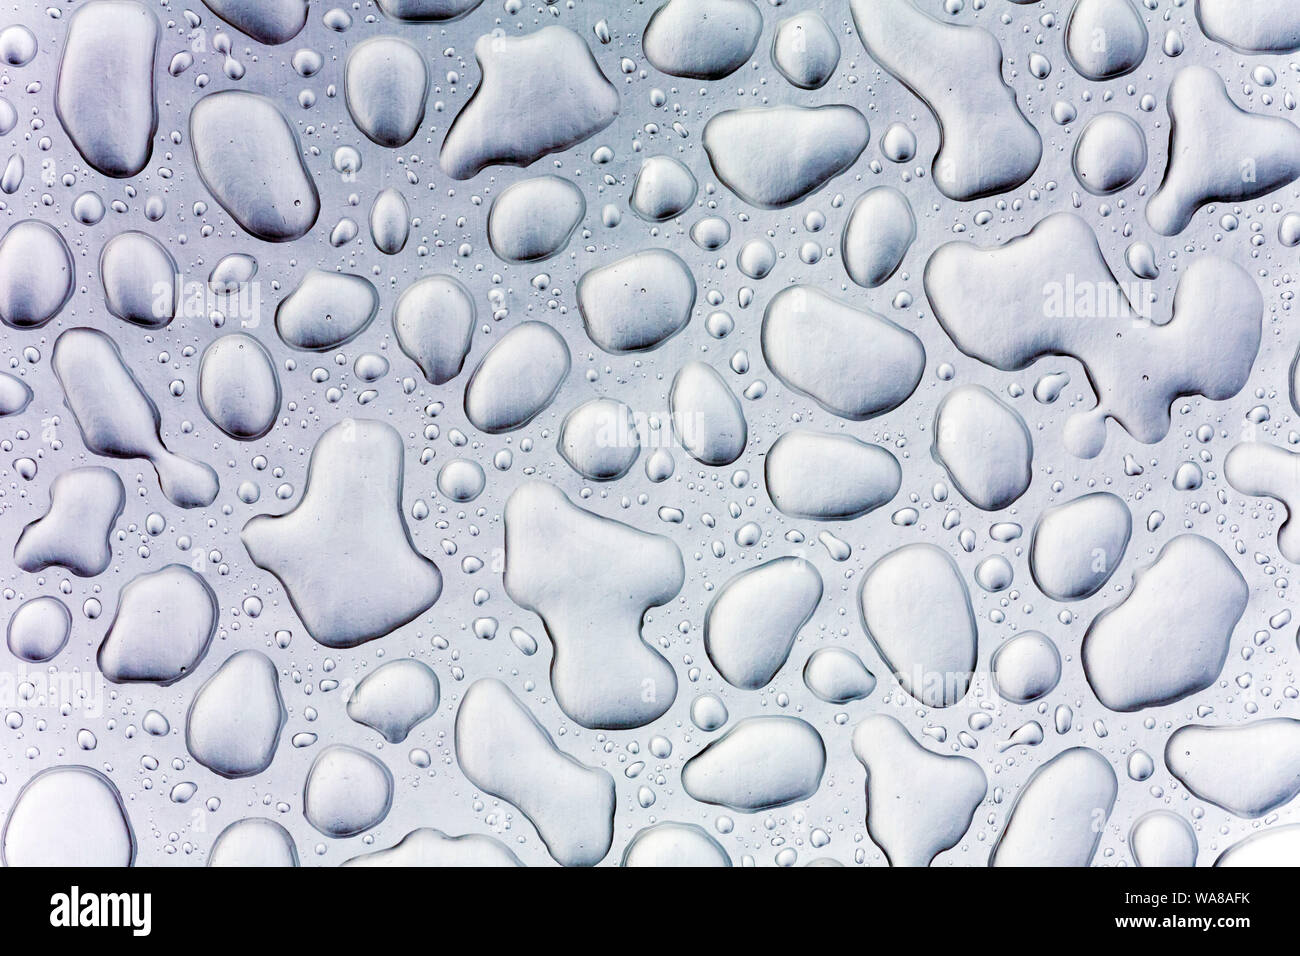 water droplets on glass Stock Photo